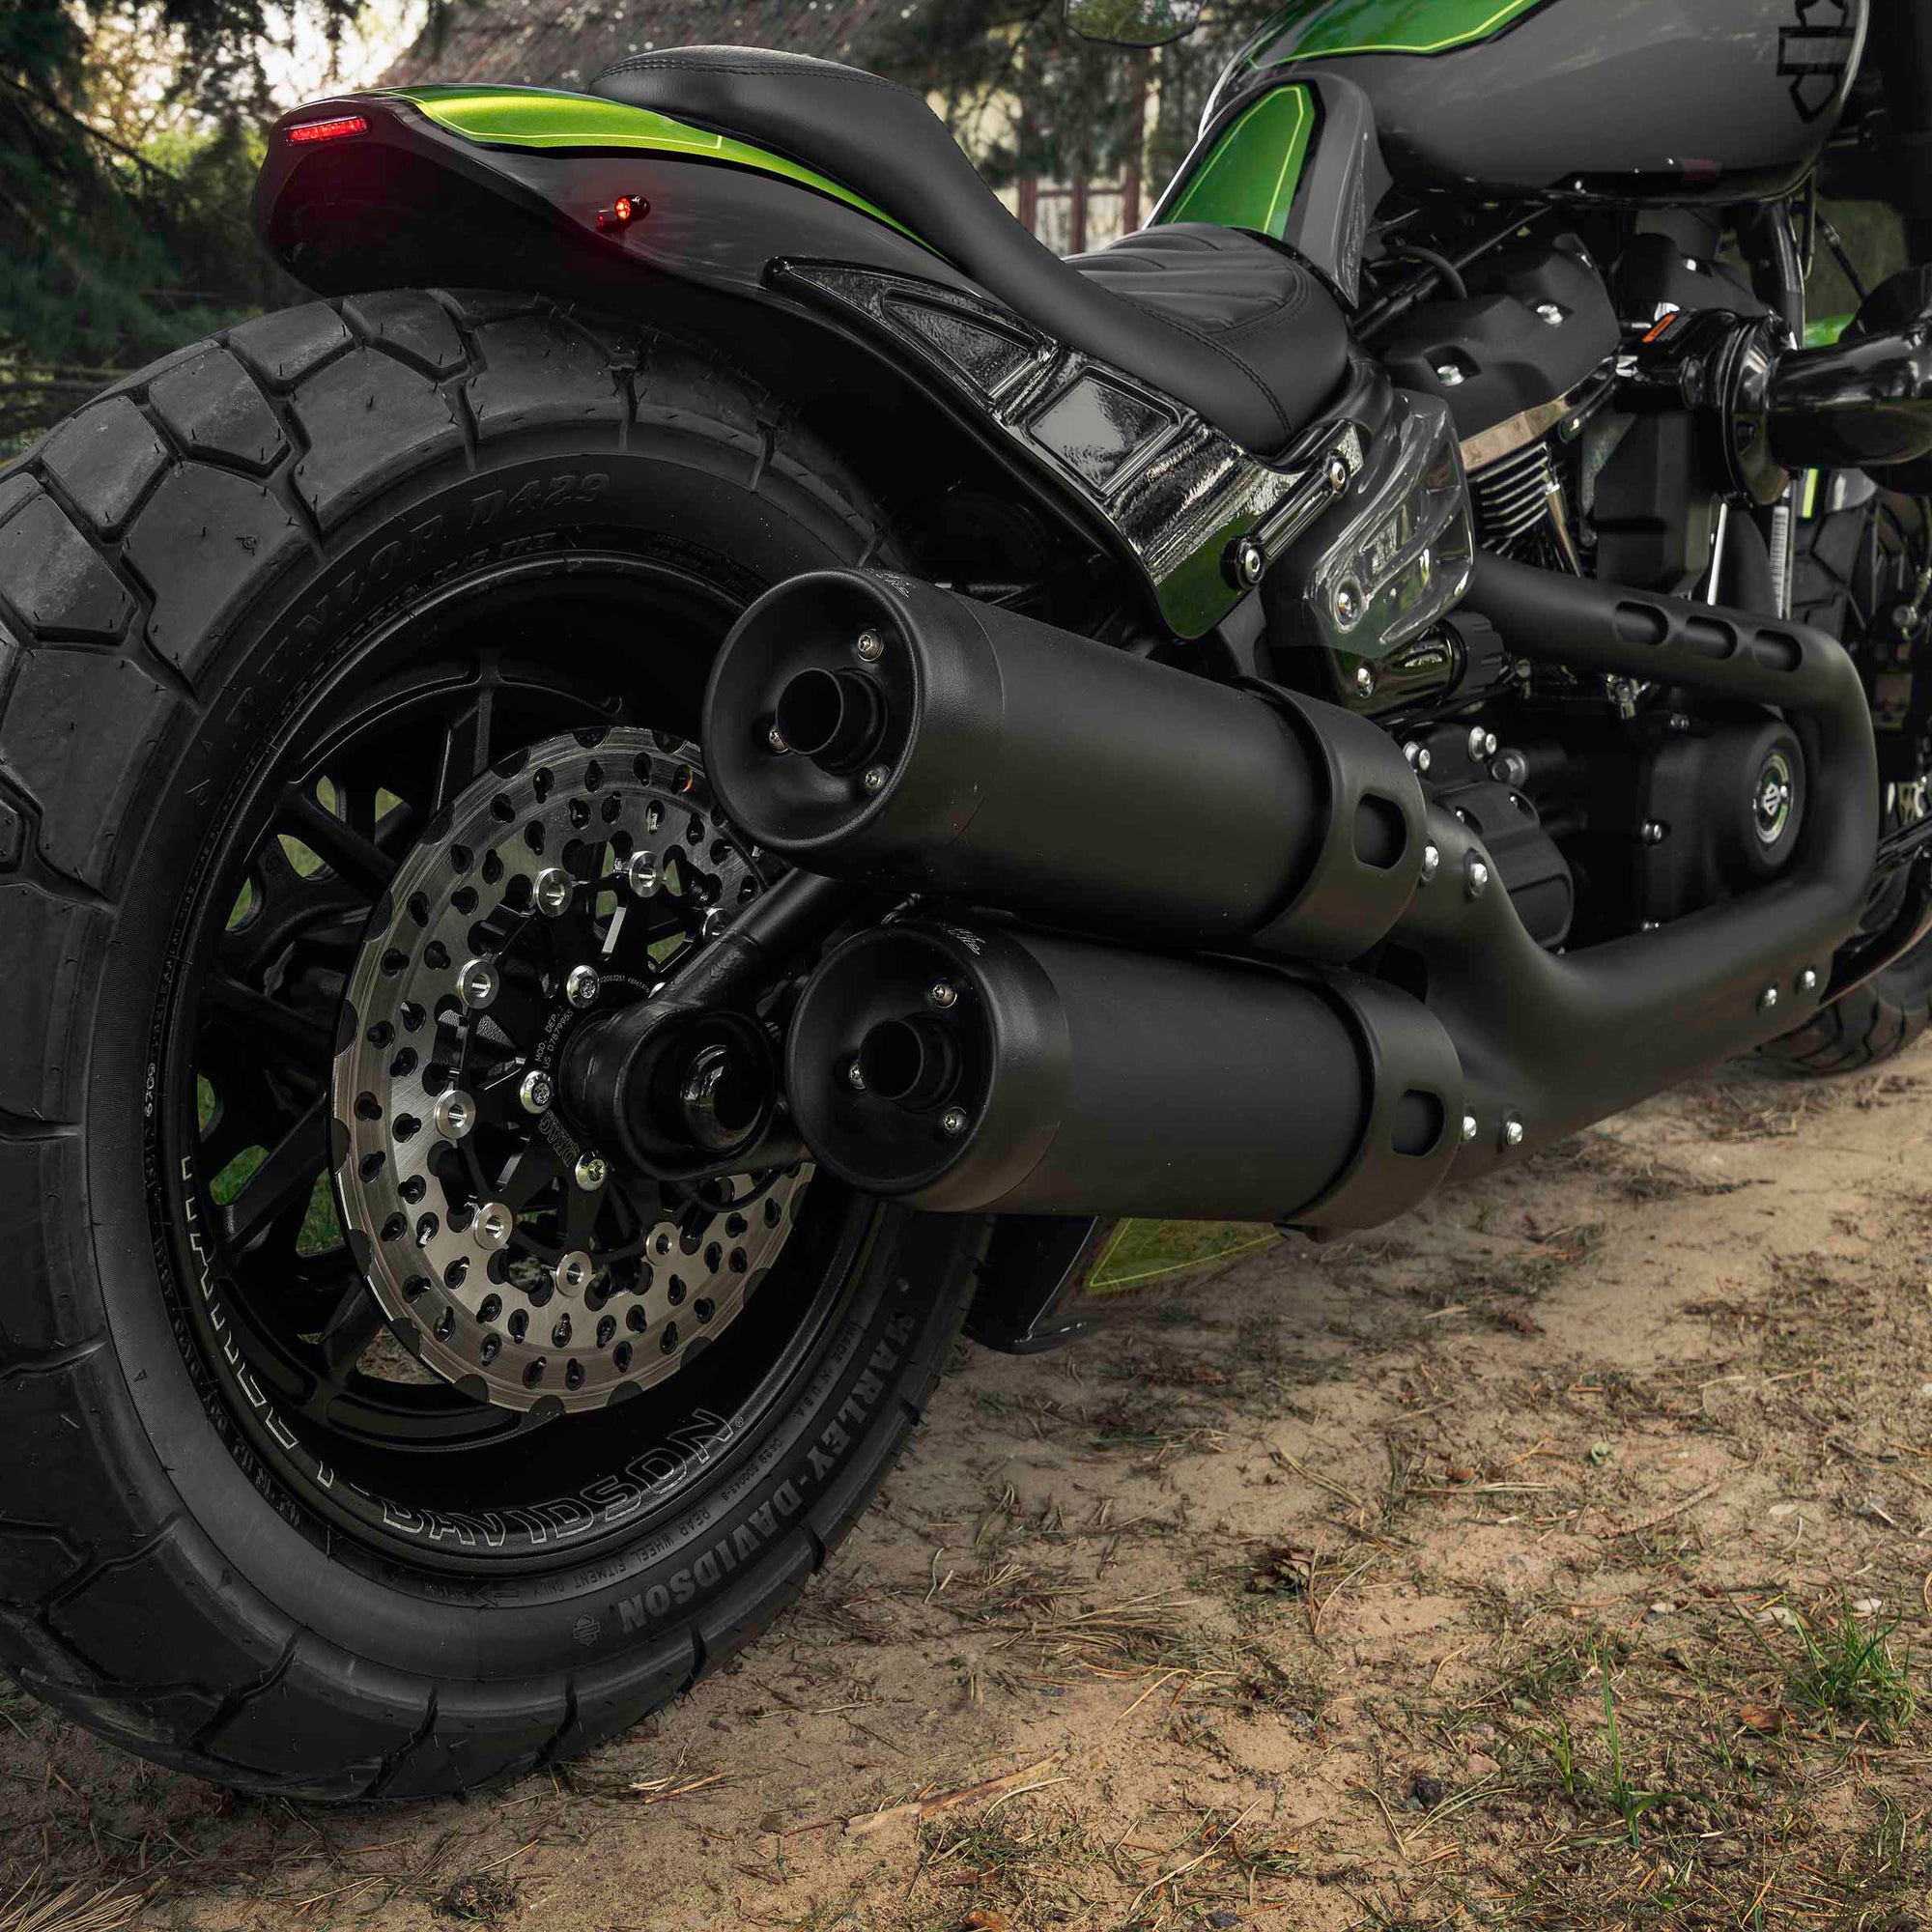 Zoomed Harley Davidson motorcycle with Killer Custom parts from the rear in a nature environment